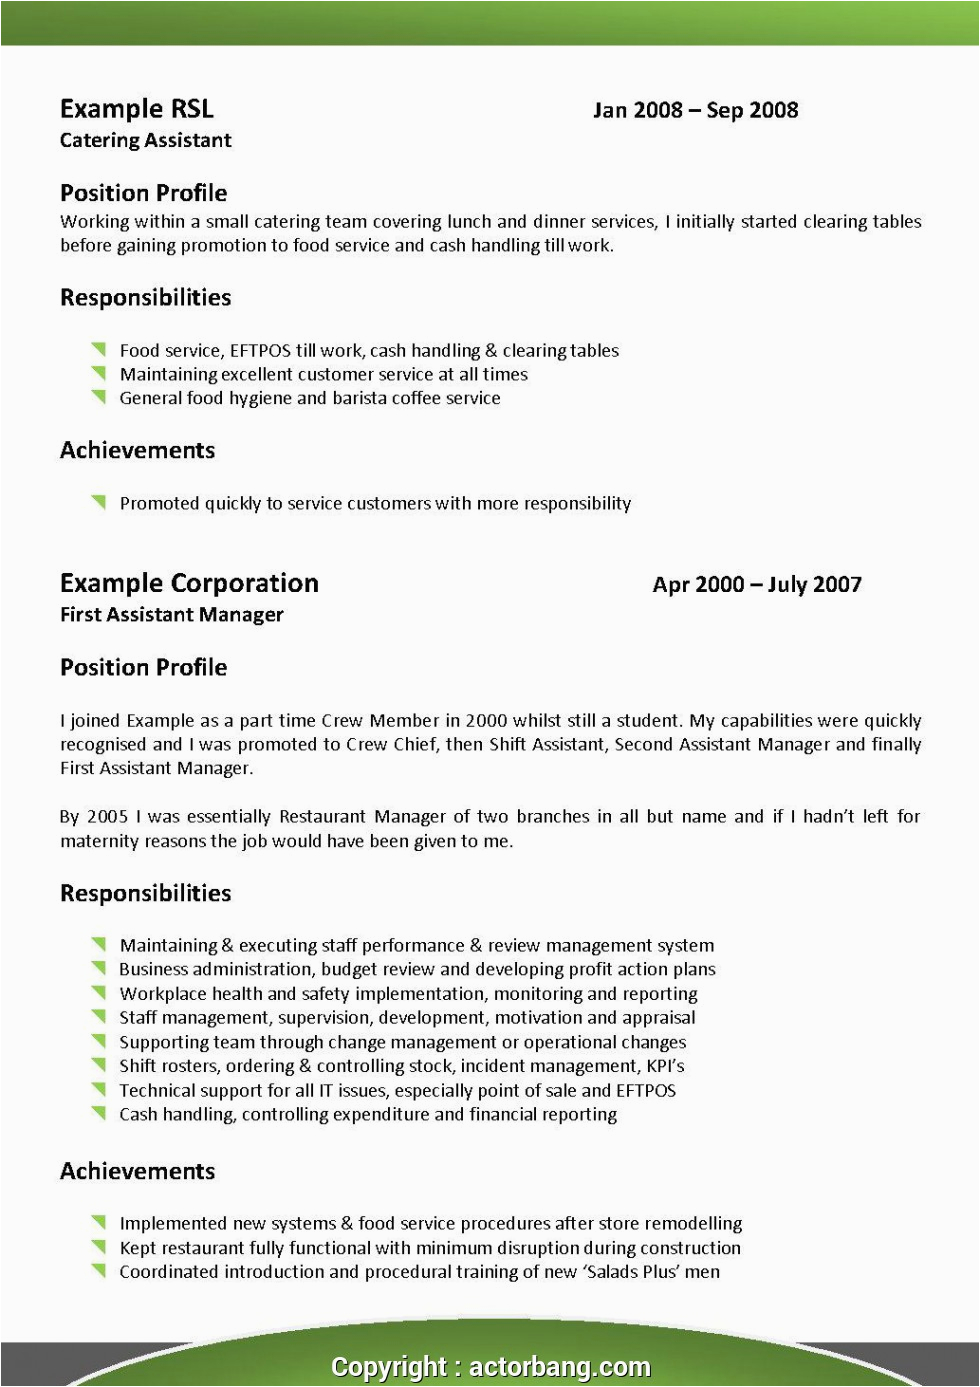 Sample Objective In Resume for Hospitality Industry Styles Sample Resume Objectives for Hospitality Industry